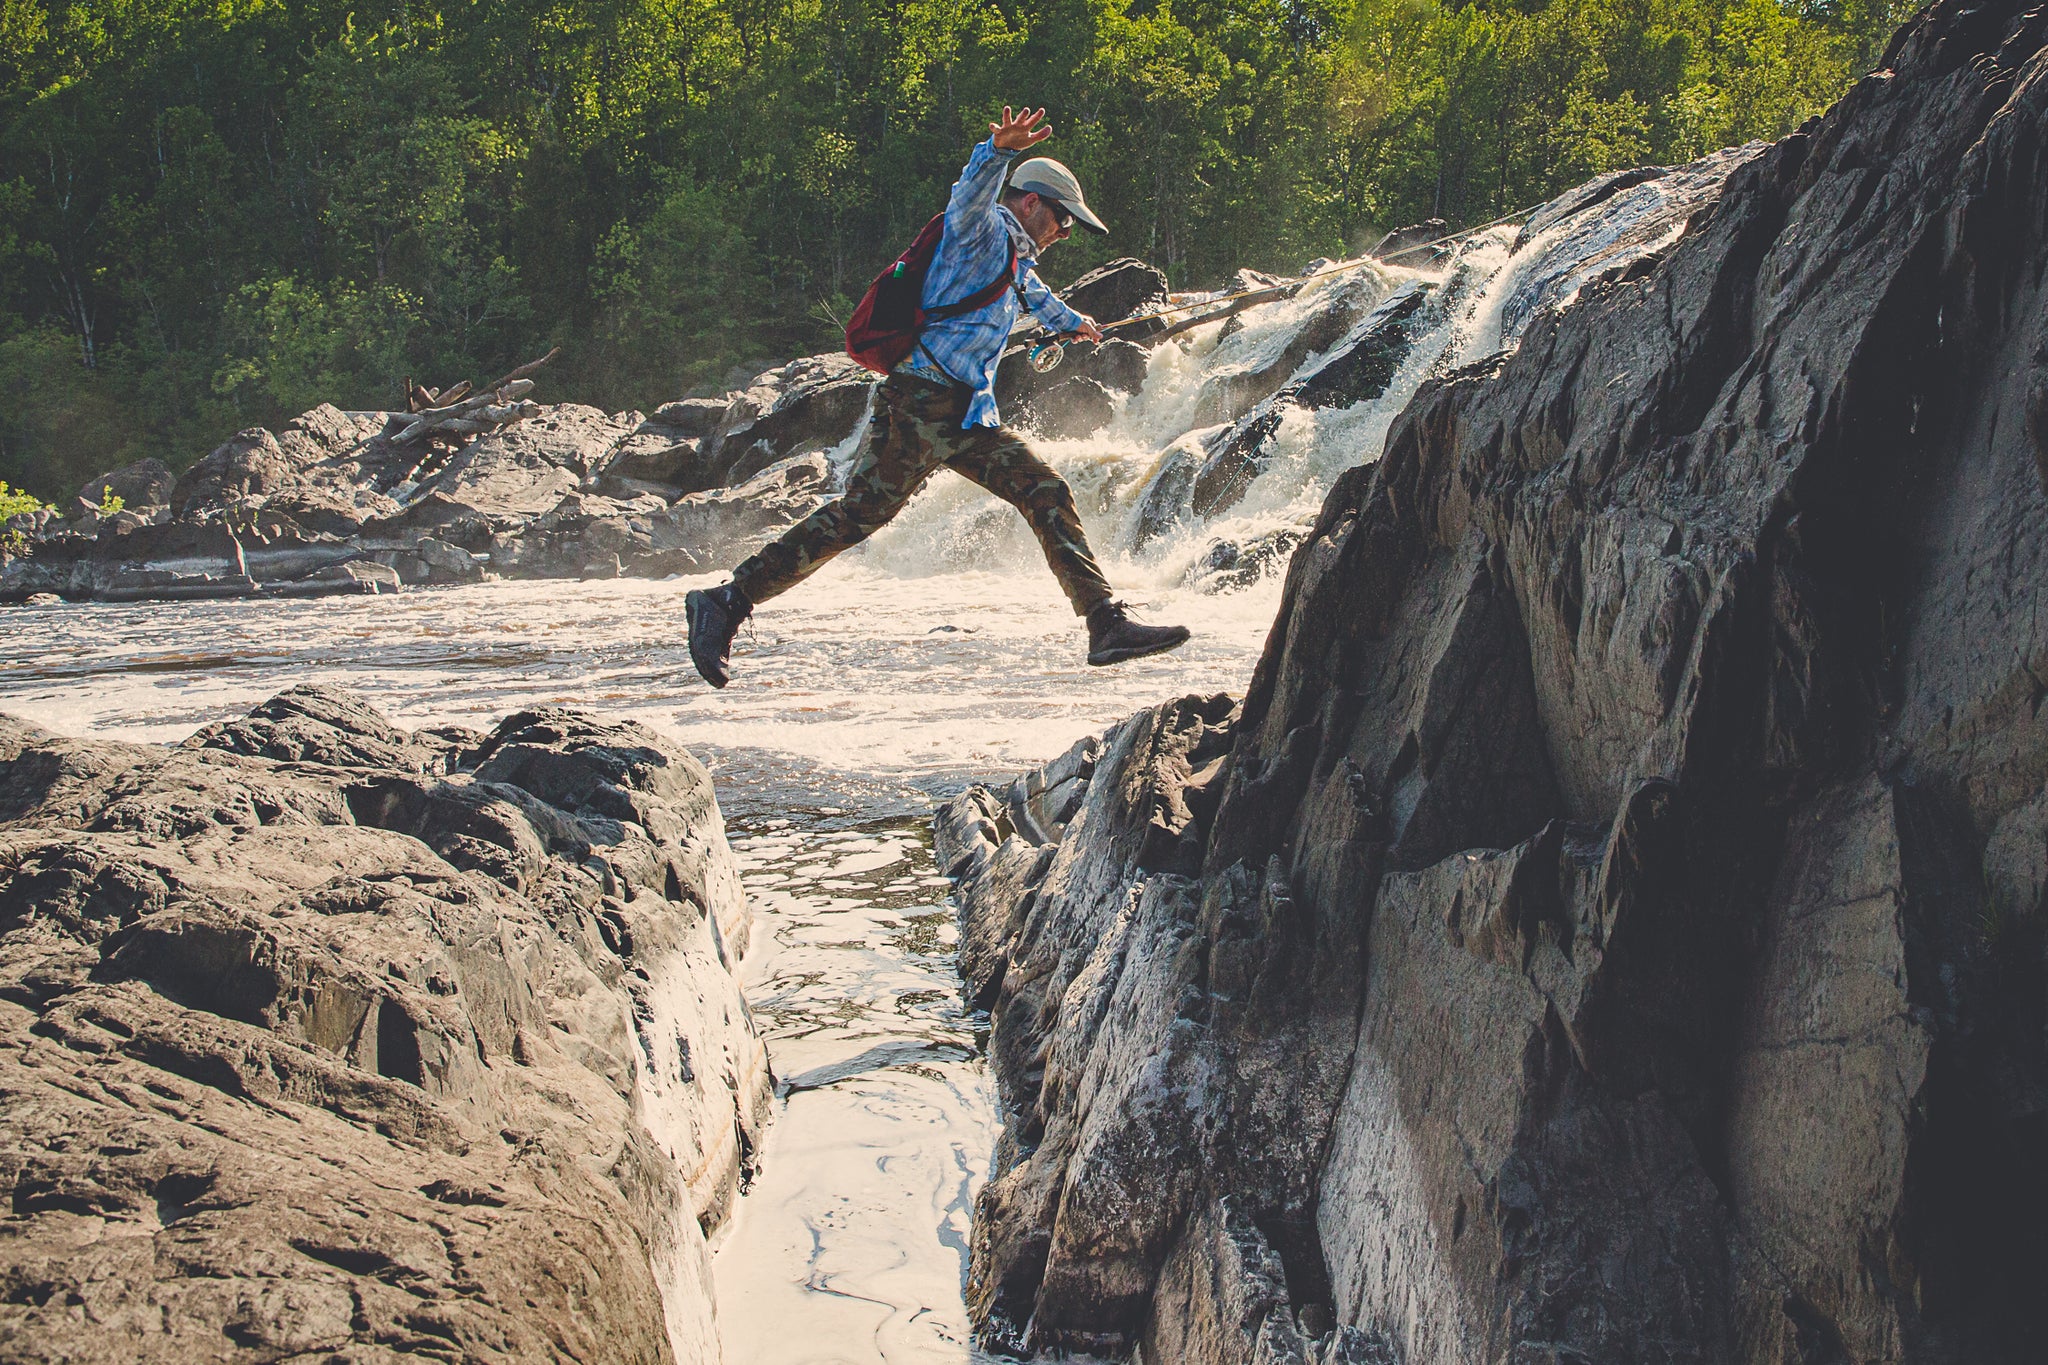 Hiker jumps over a small section of the river